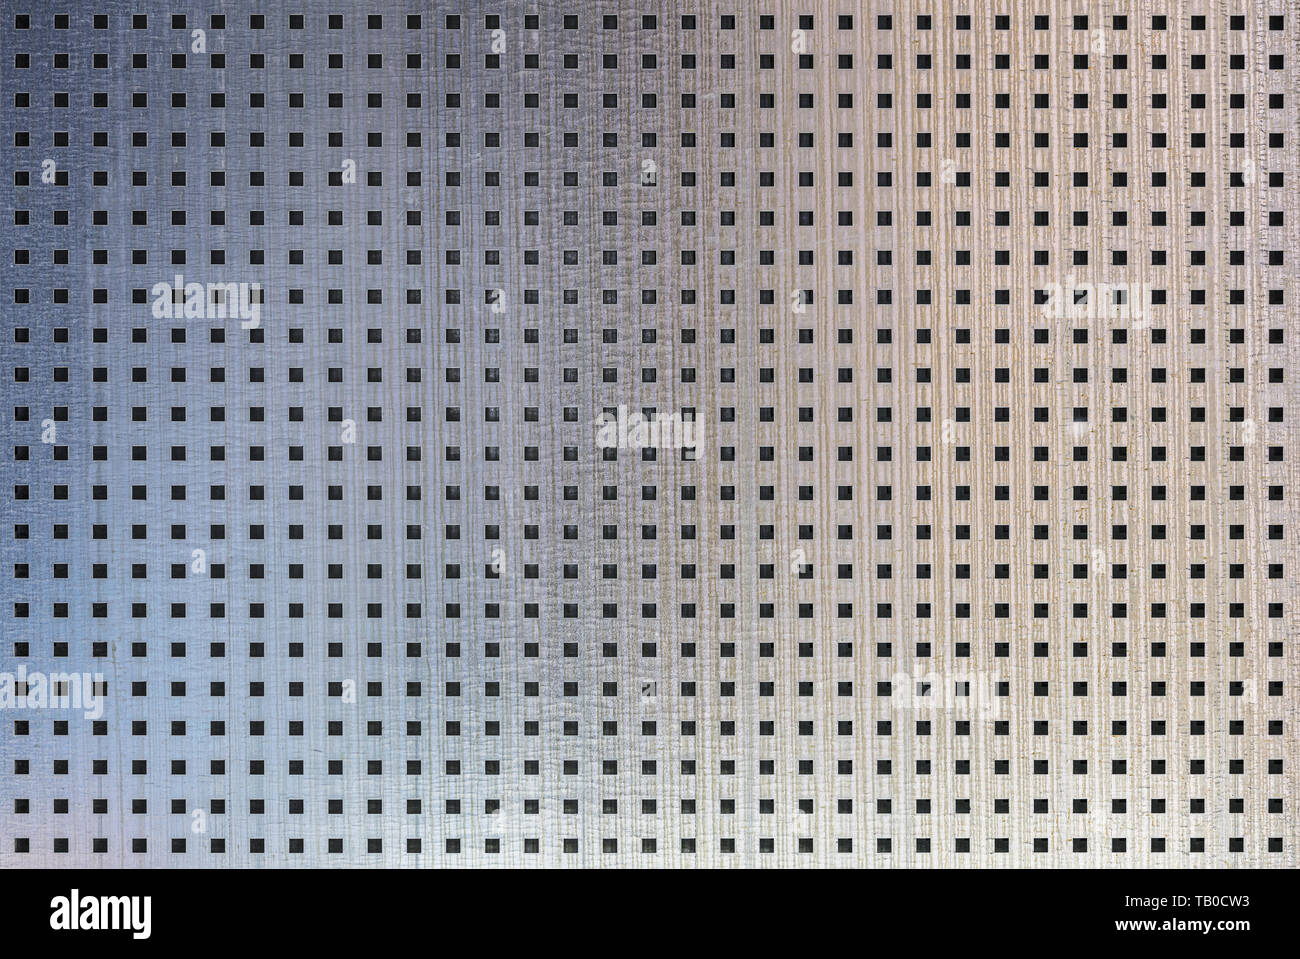 perforated metal seamless texture. sheet of metal covered with square holes. industrial background Stock Photo